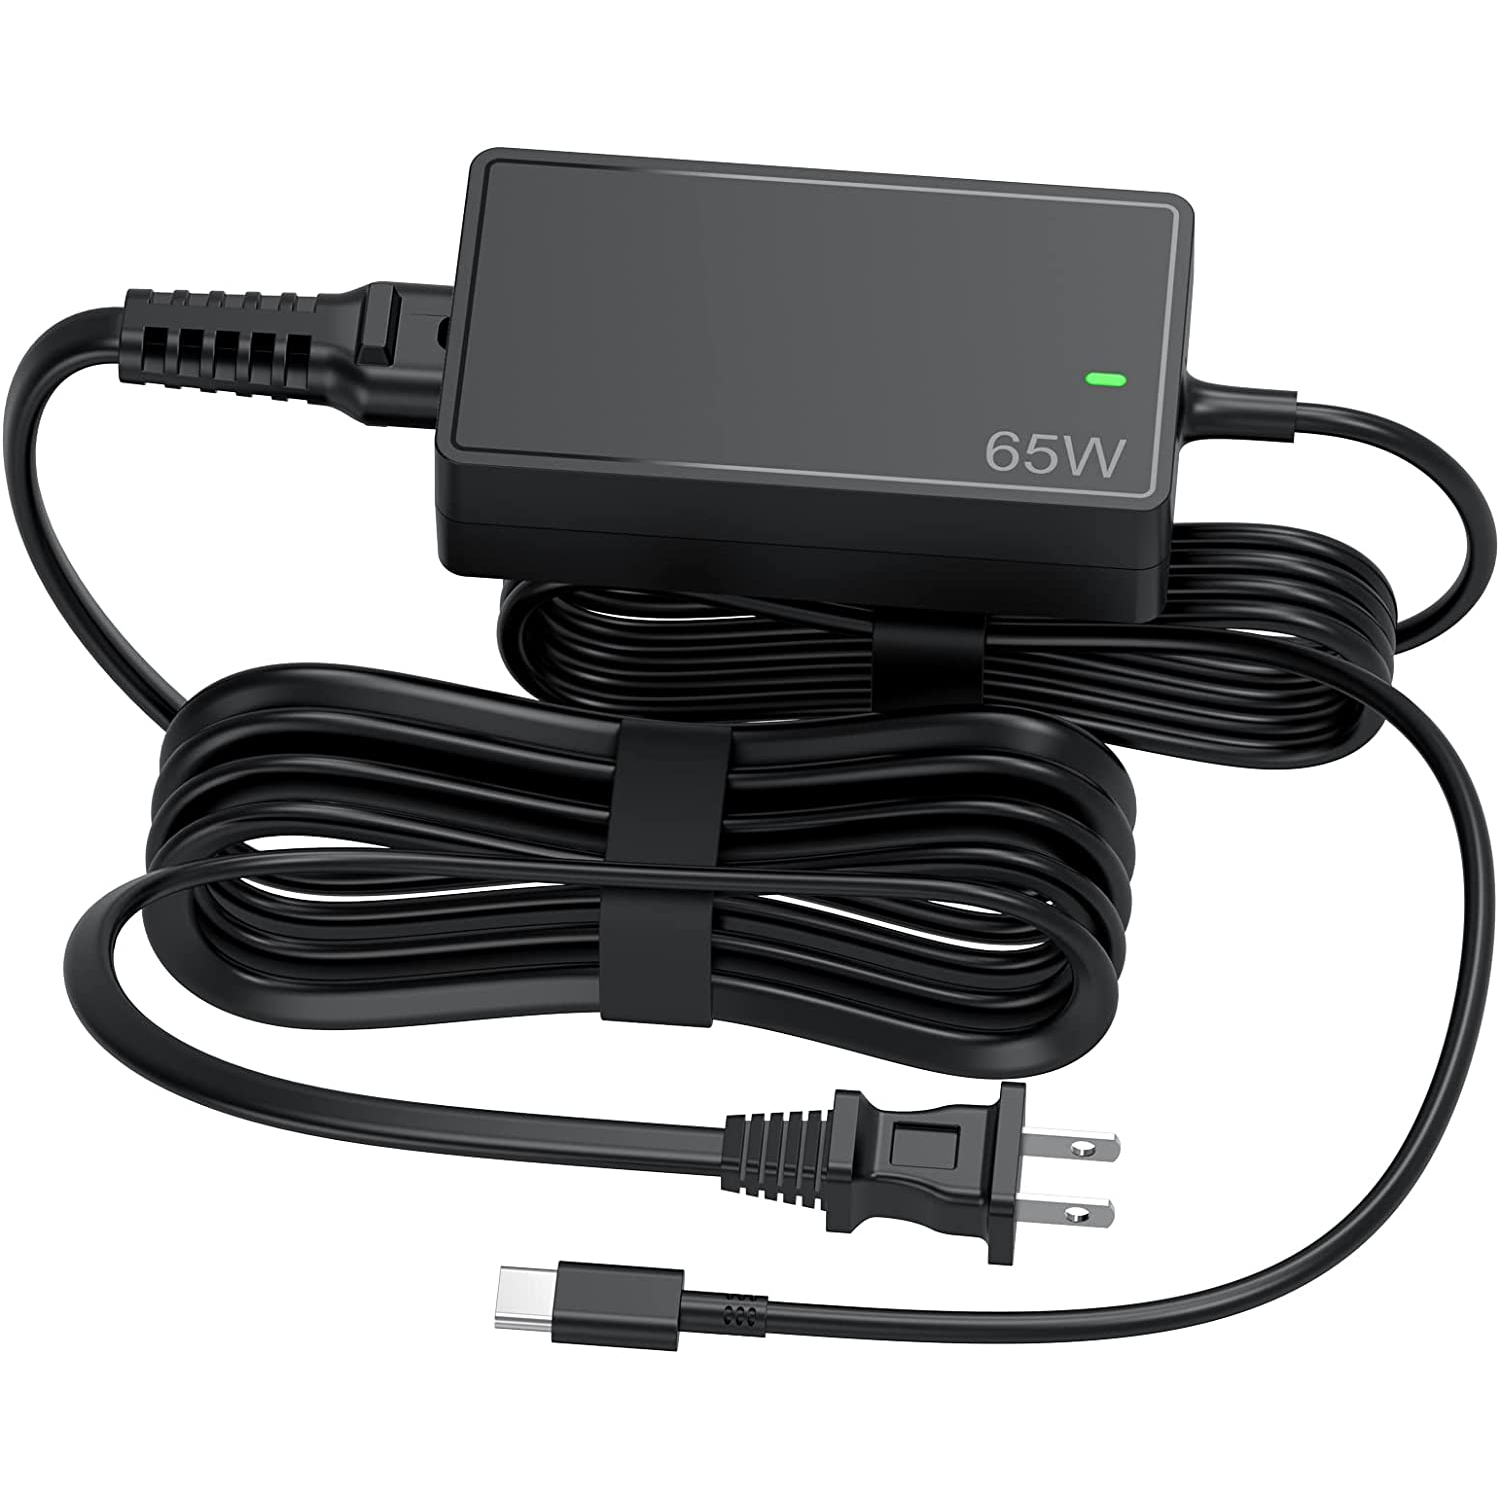 USB-C Laptop Charger 65W 45W Chromebook Charger for Acer Chromebook Spin Swift 7 11 13 14 15 311 315 512, for Lenovo Chromebook ThinkPad 300e 500e T480 T580 T490 Dell Latitude XPS